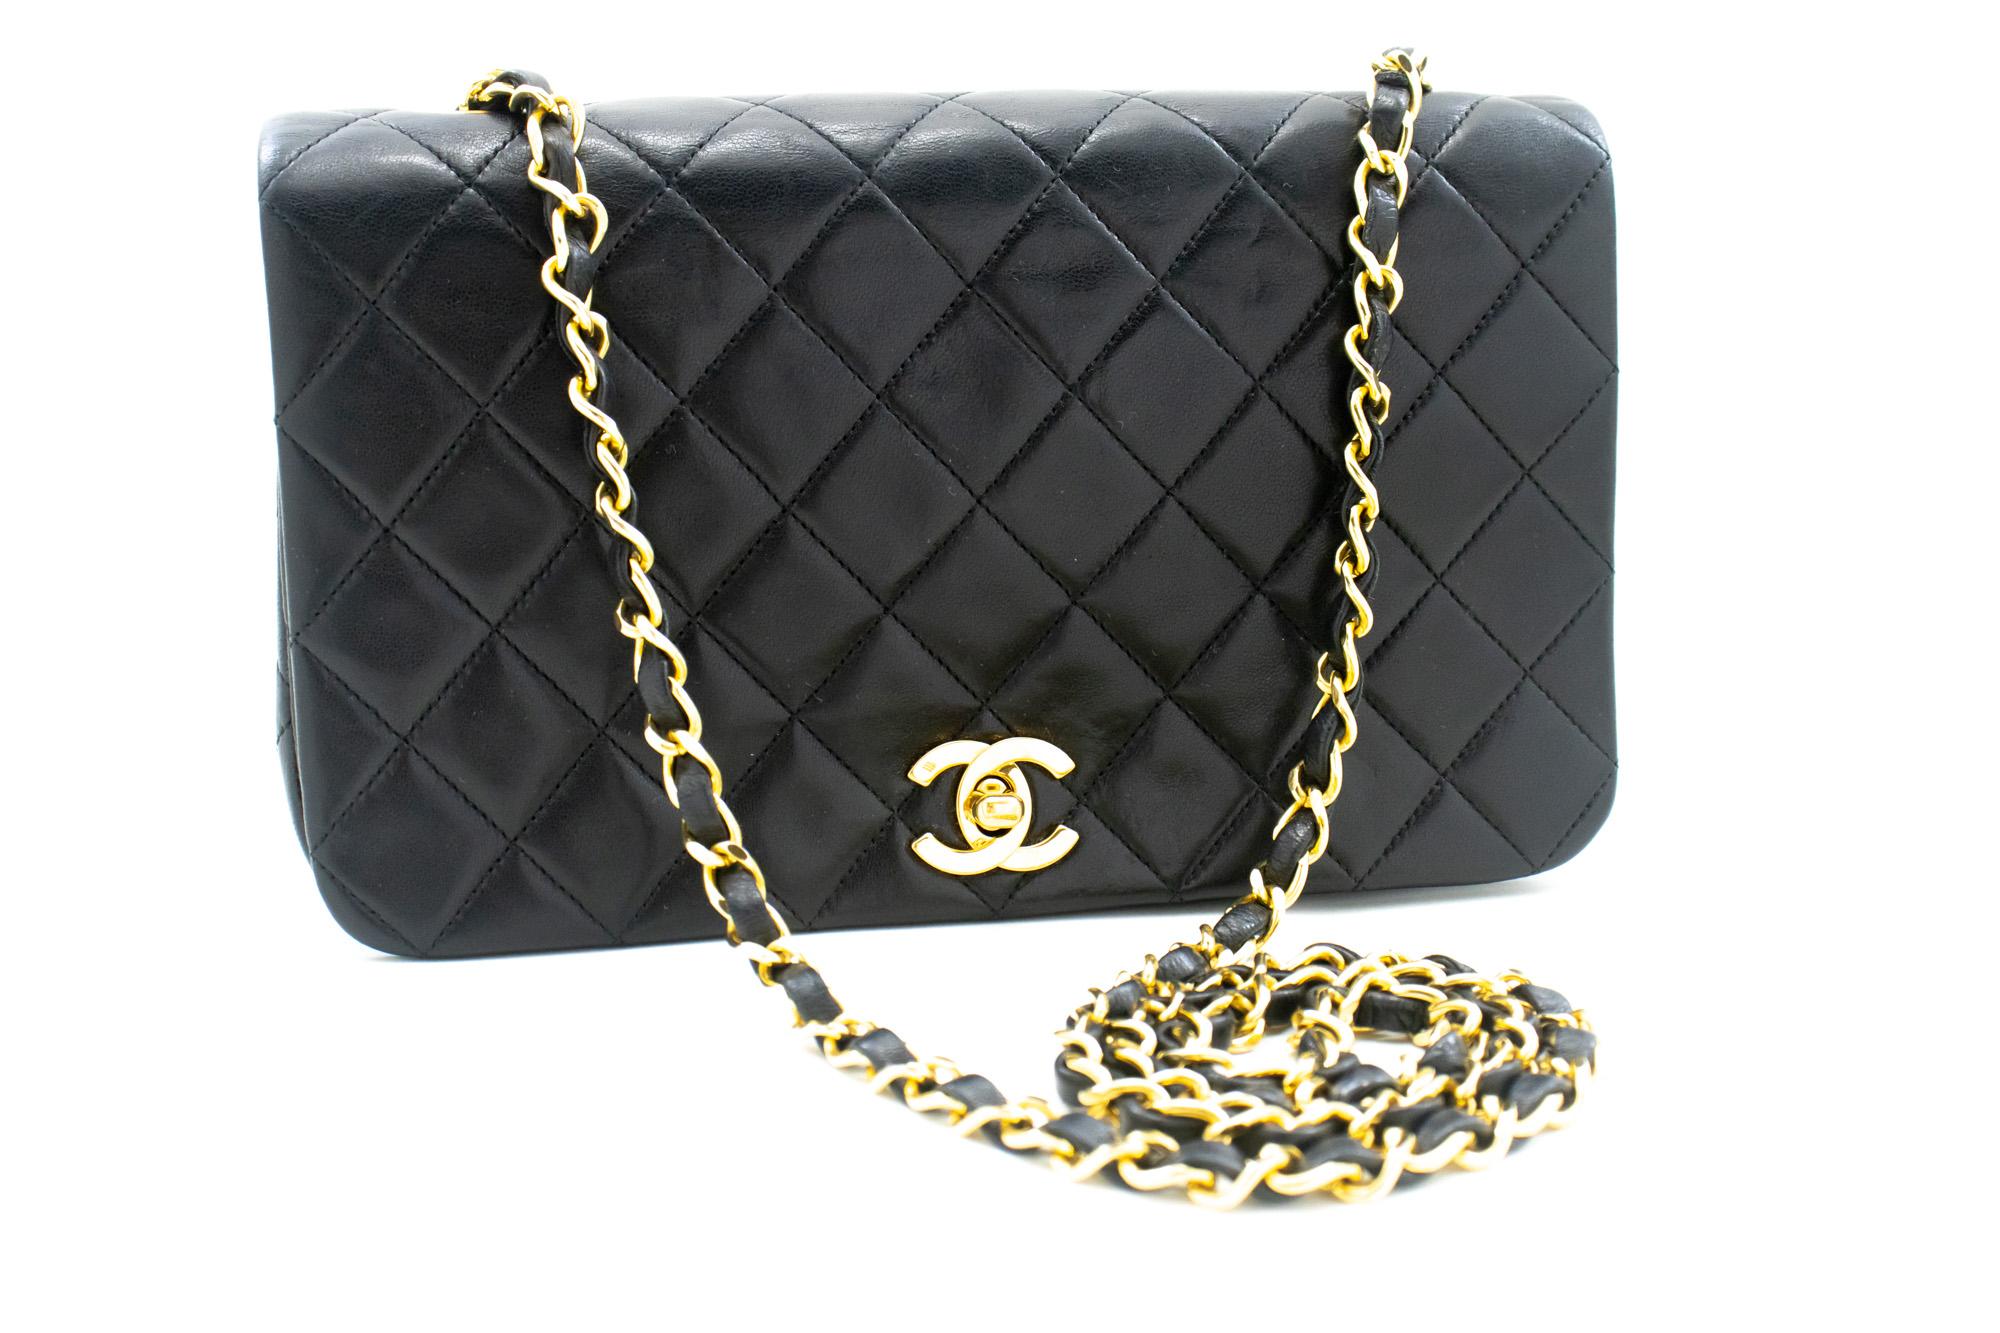 An authentic CHANEL Full Flap Chain Shoulder Bag Black Quilted made of black Lambskin. The color is Black. The outside material is Leather. The pattern is Solid. This item is Vintage / Classic. The year of manufacture would be 1989-1991.
Conditions